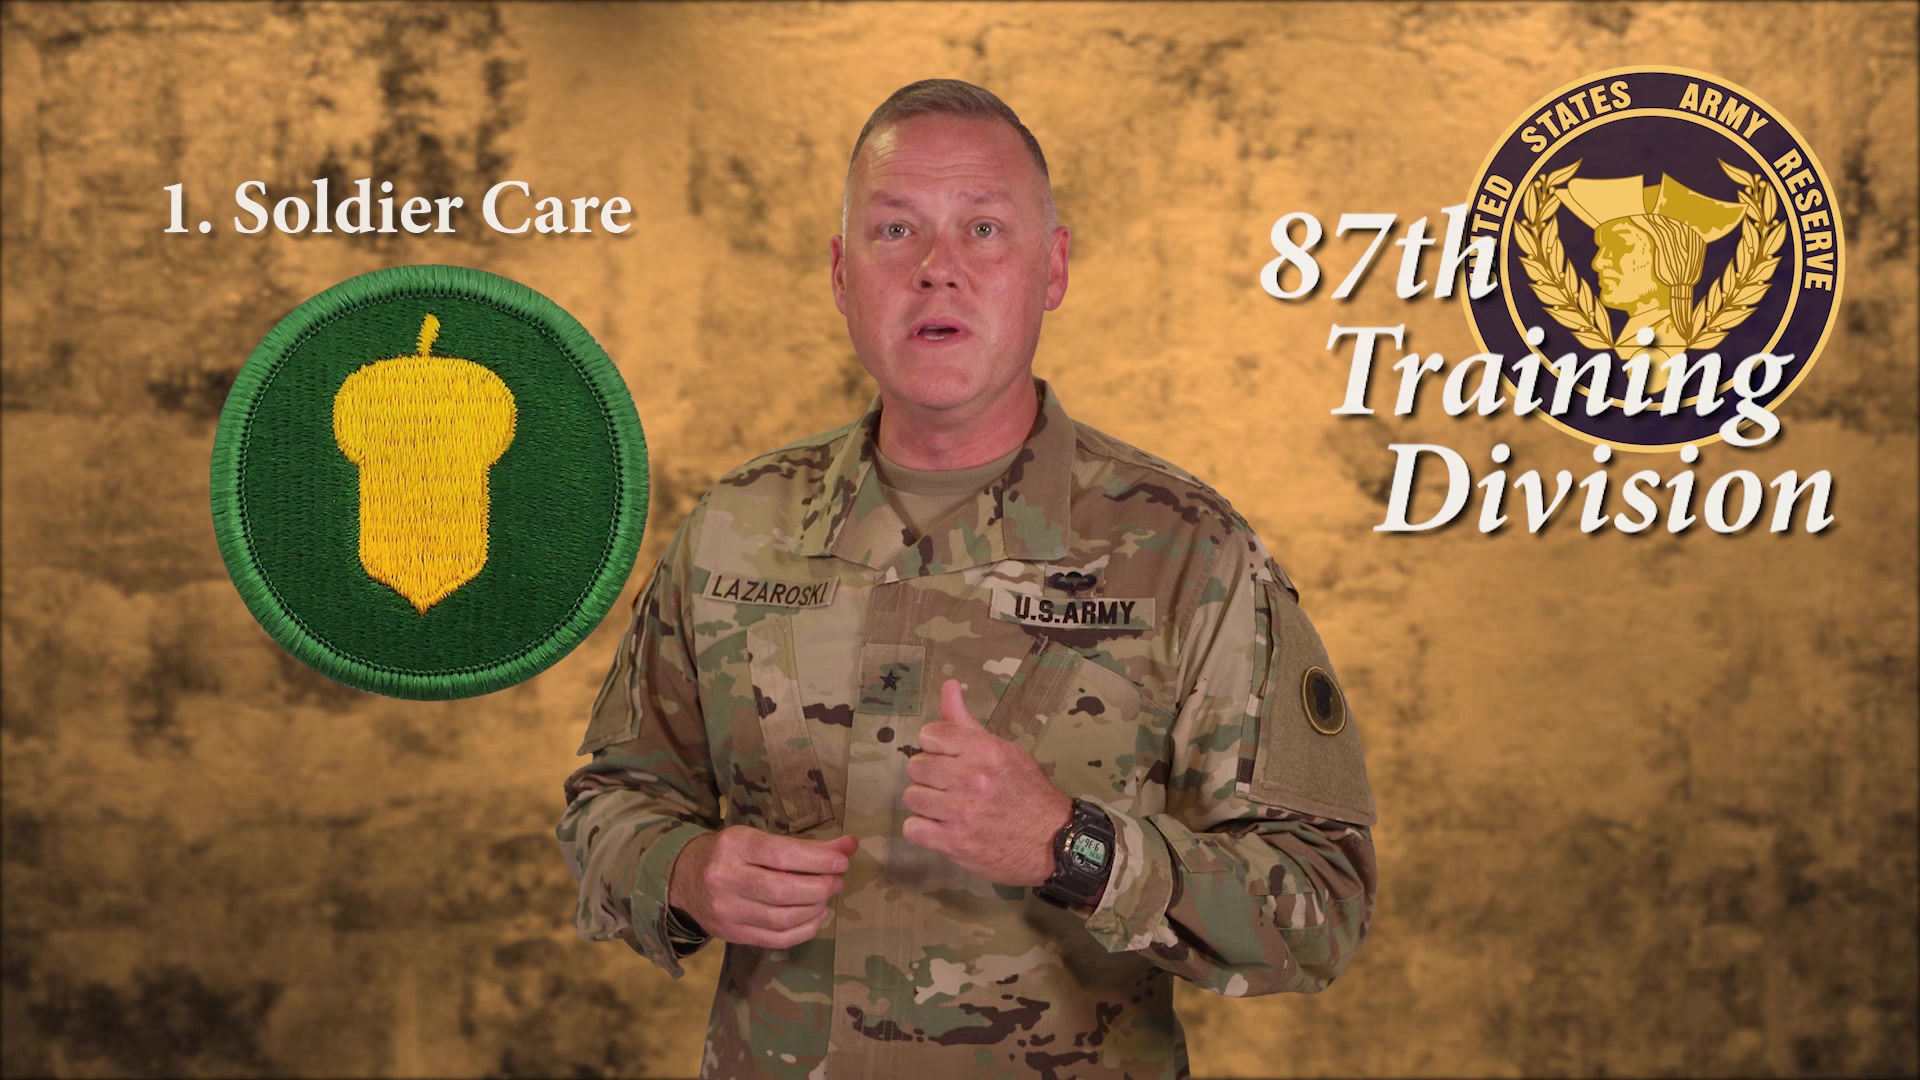 The newly activating 87th Training Division Commanding General, Brig. Gen. Todd Lazaroski, provides an introduction to this historical division and welcomes you to join the team.  (Video by David Isakson, Fort Knox Visual Information)

Email: usarmy.usarc.87-tsd.mbx.g1@mail.mil, or call
(404) 323-8978 for more details.